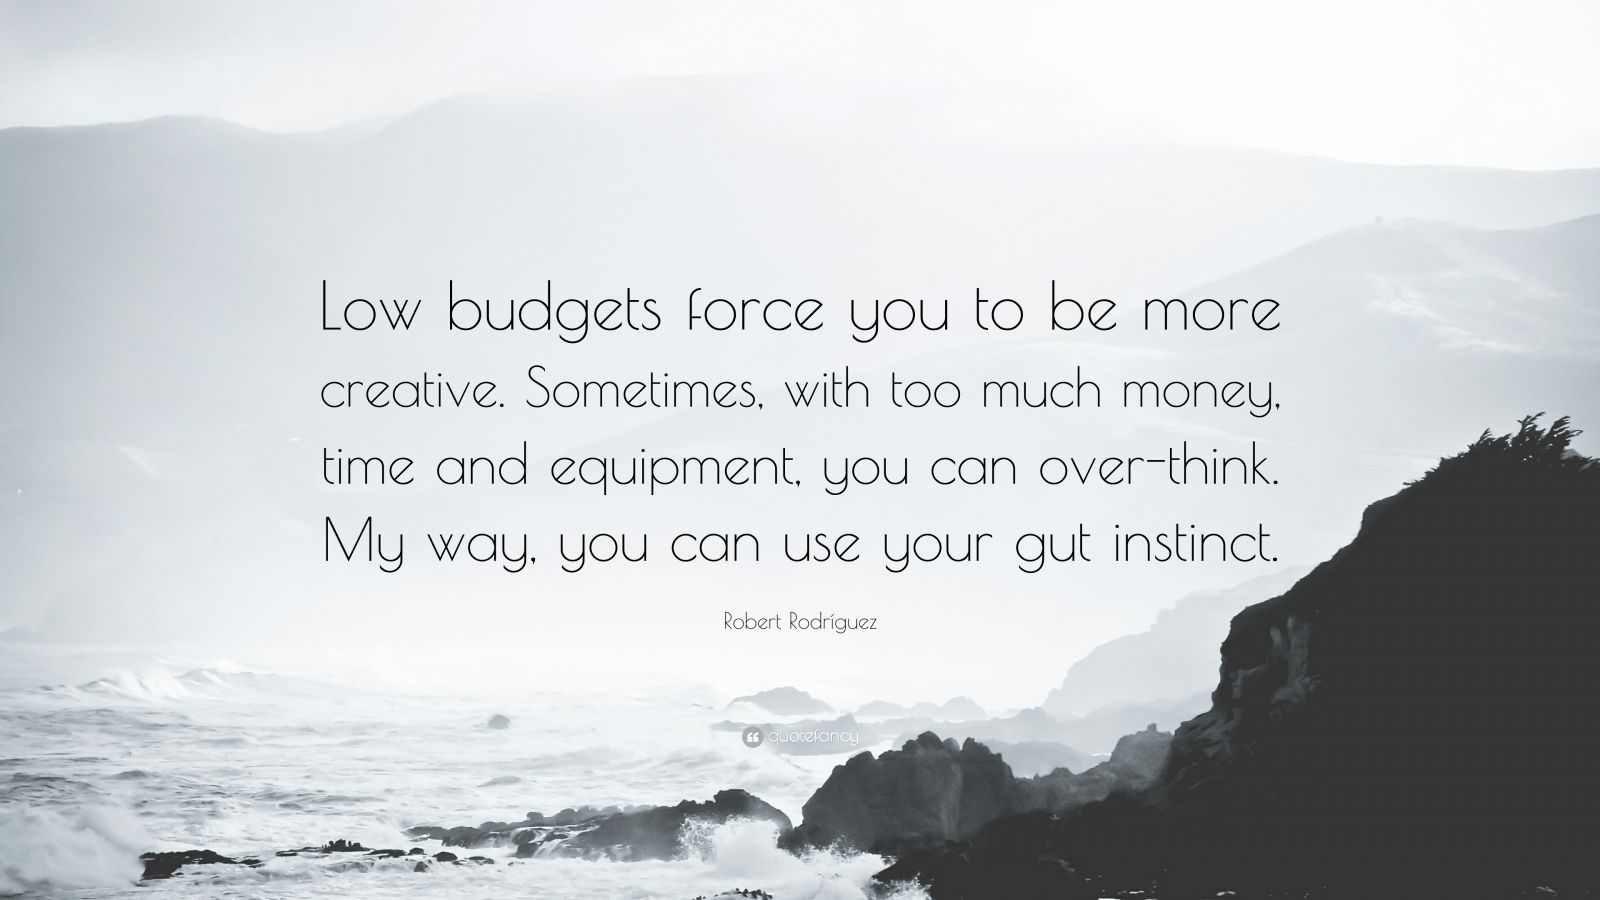 Robert Rodríguez Quote “low Budgets Force You To Be More Creative